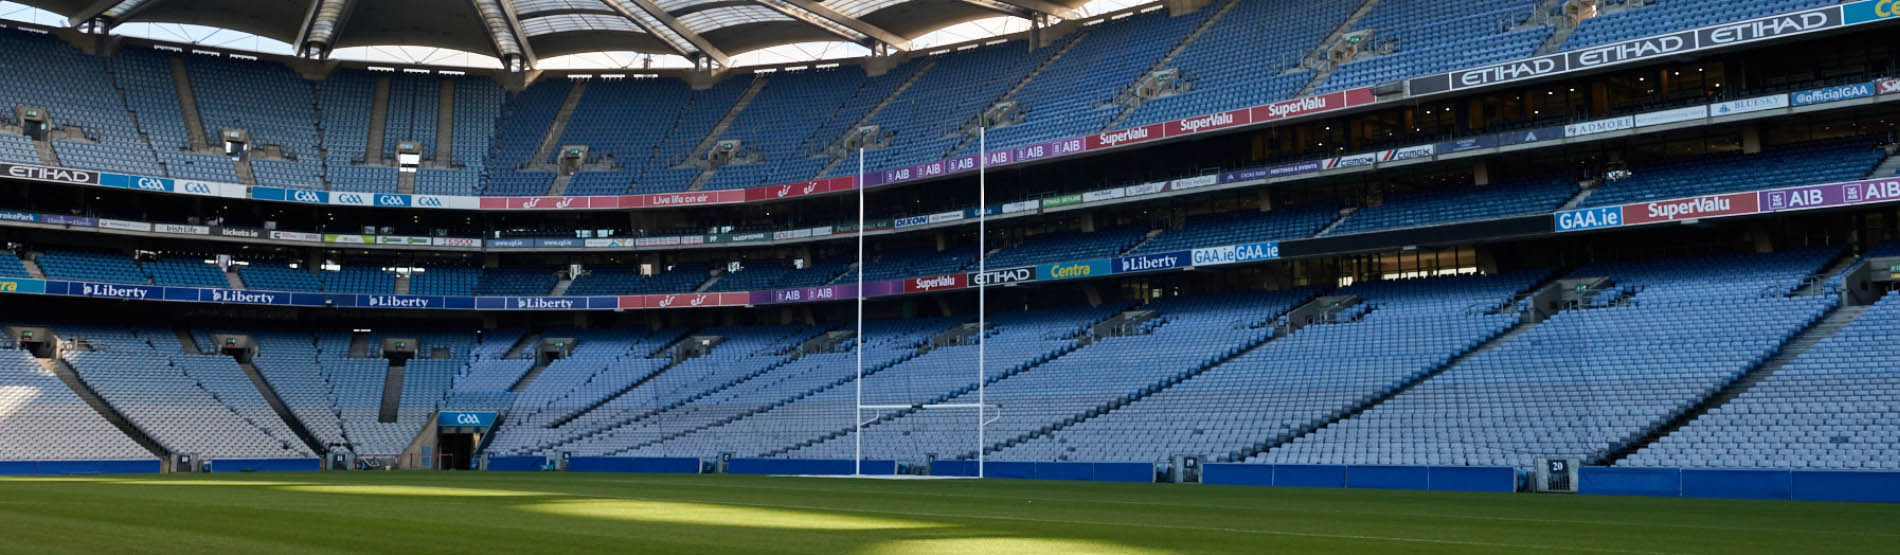 pitch side view at Croke Park stadium